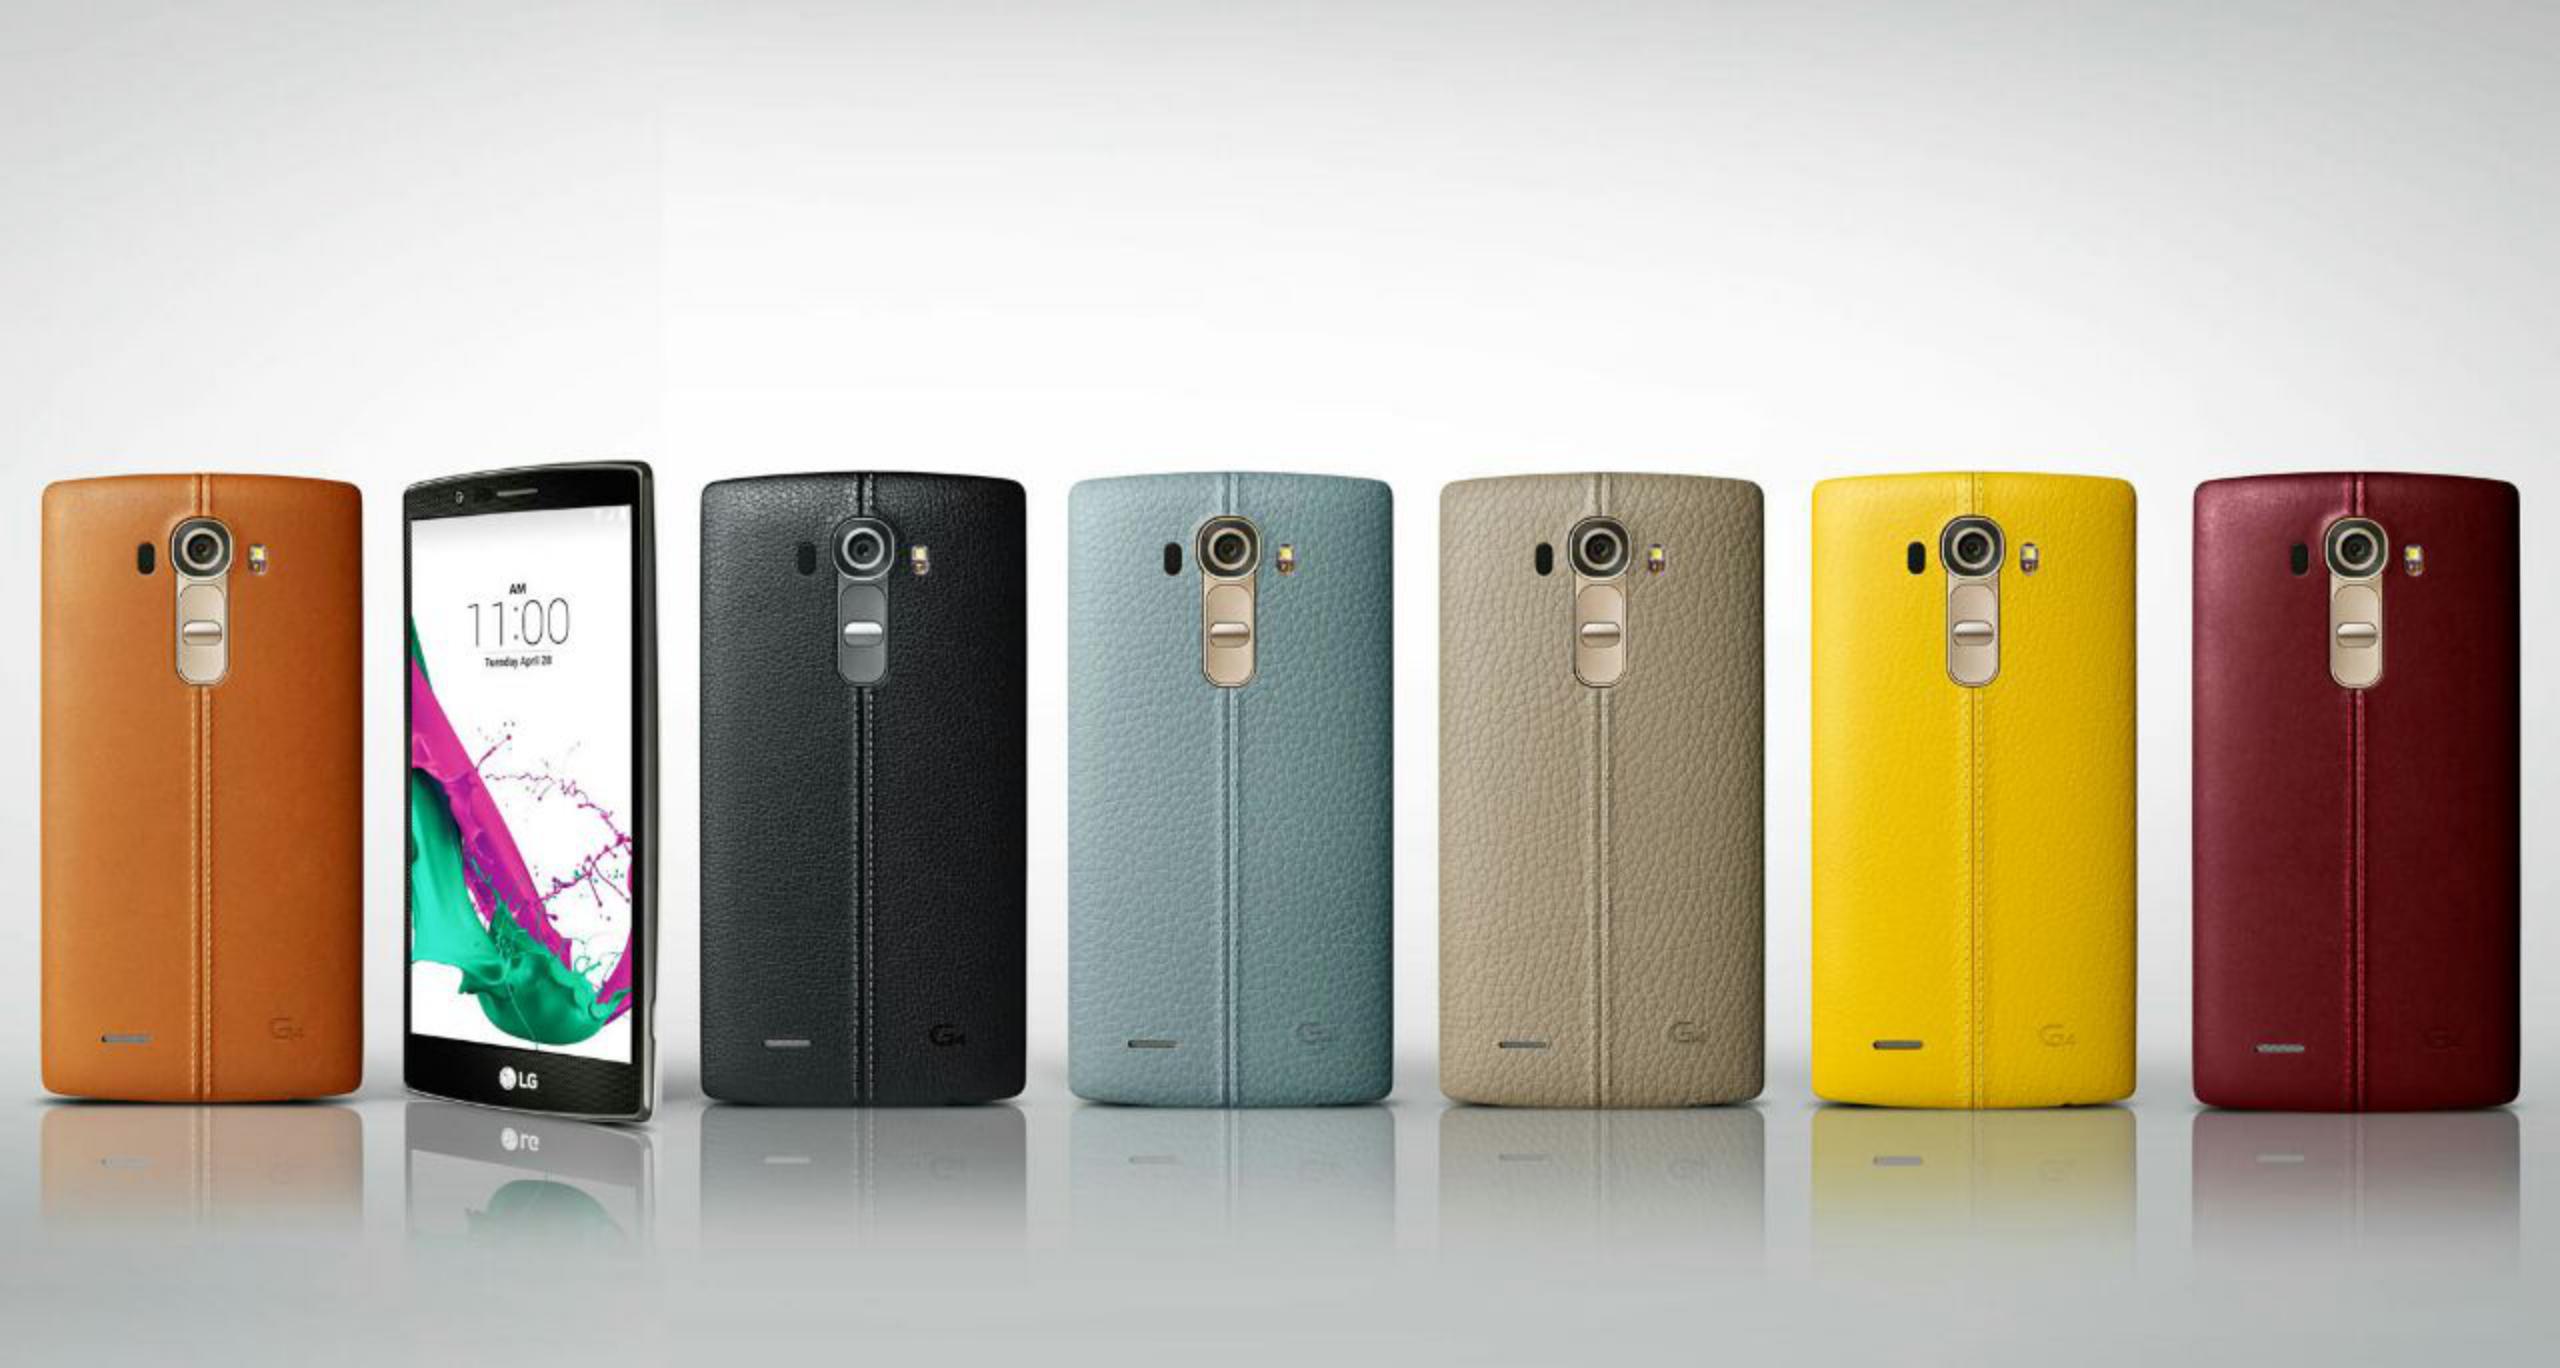 The LG G4 will be updated to Android 5.1.1 Lollipop 1